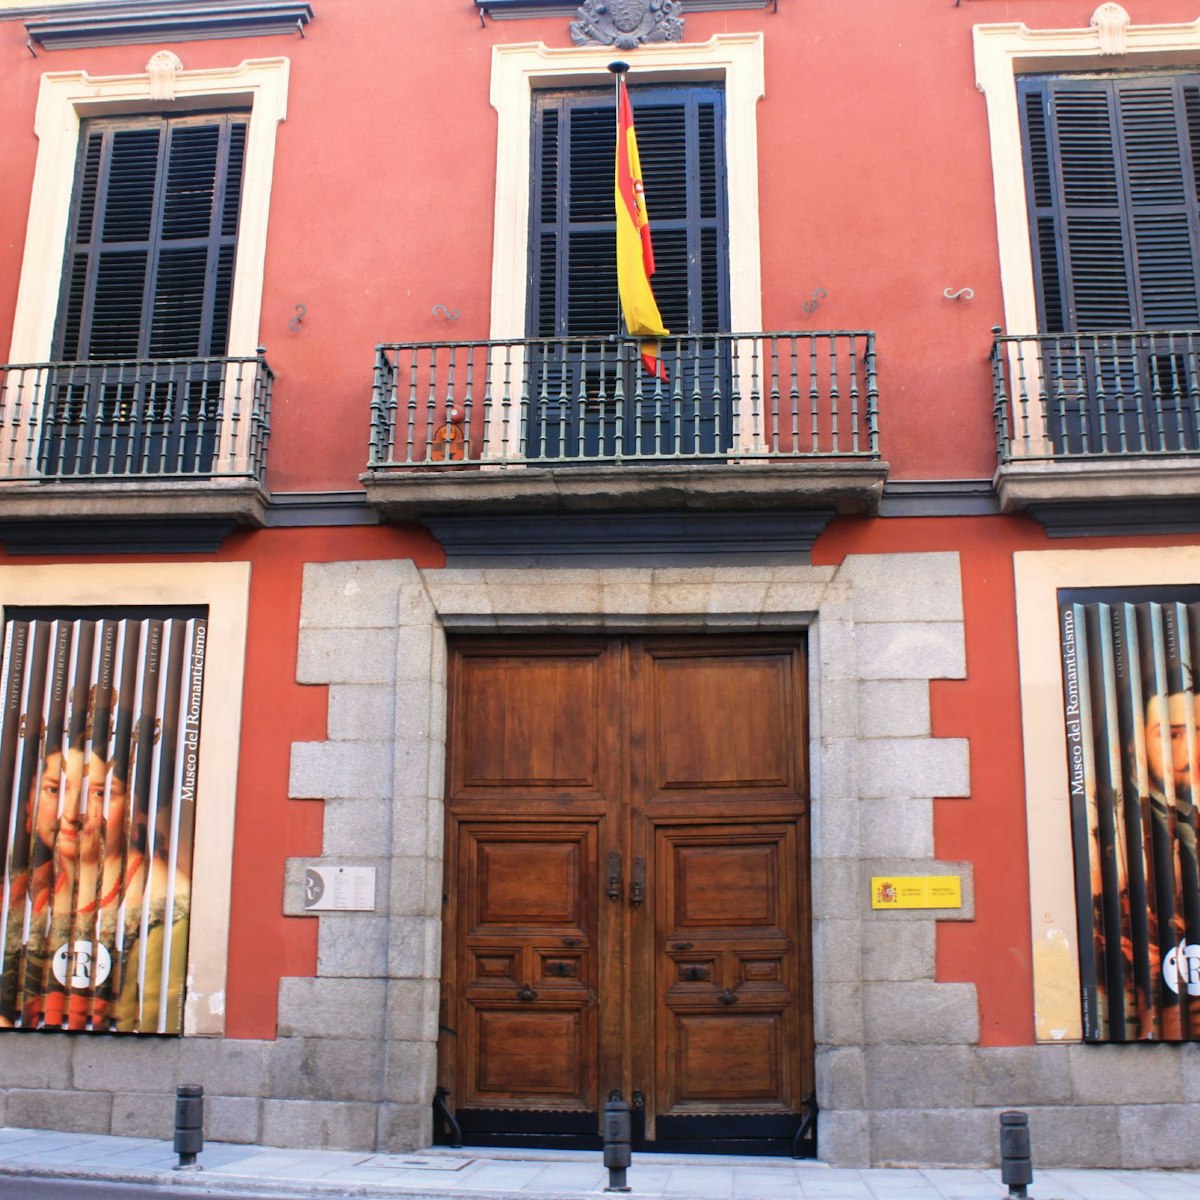 The Spanish flag flies outside of the Museo del Romanticismo.